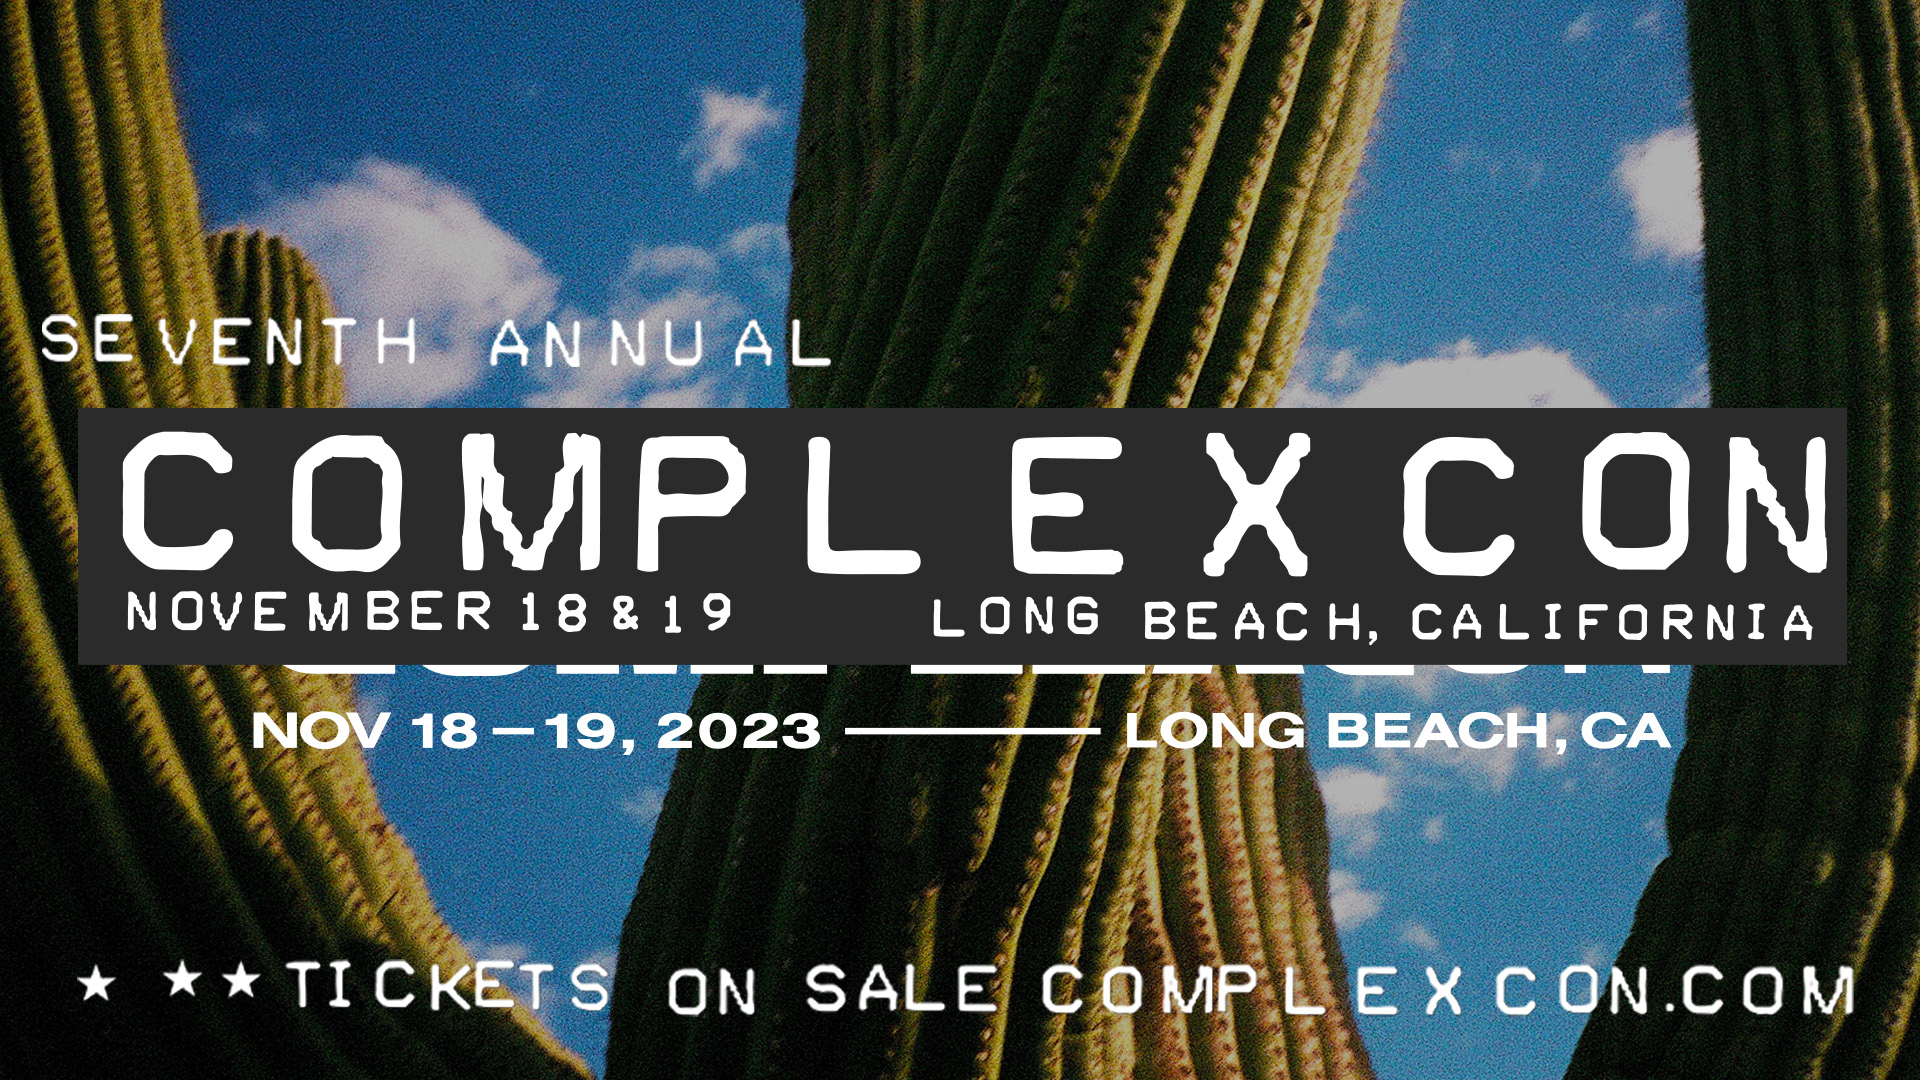 ComplexCons 2023 Tickets On Sale Now!